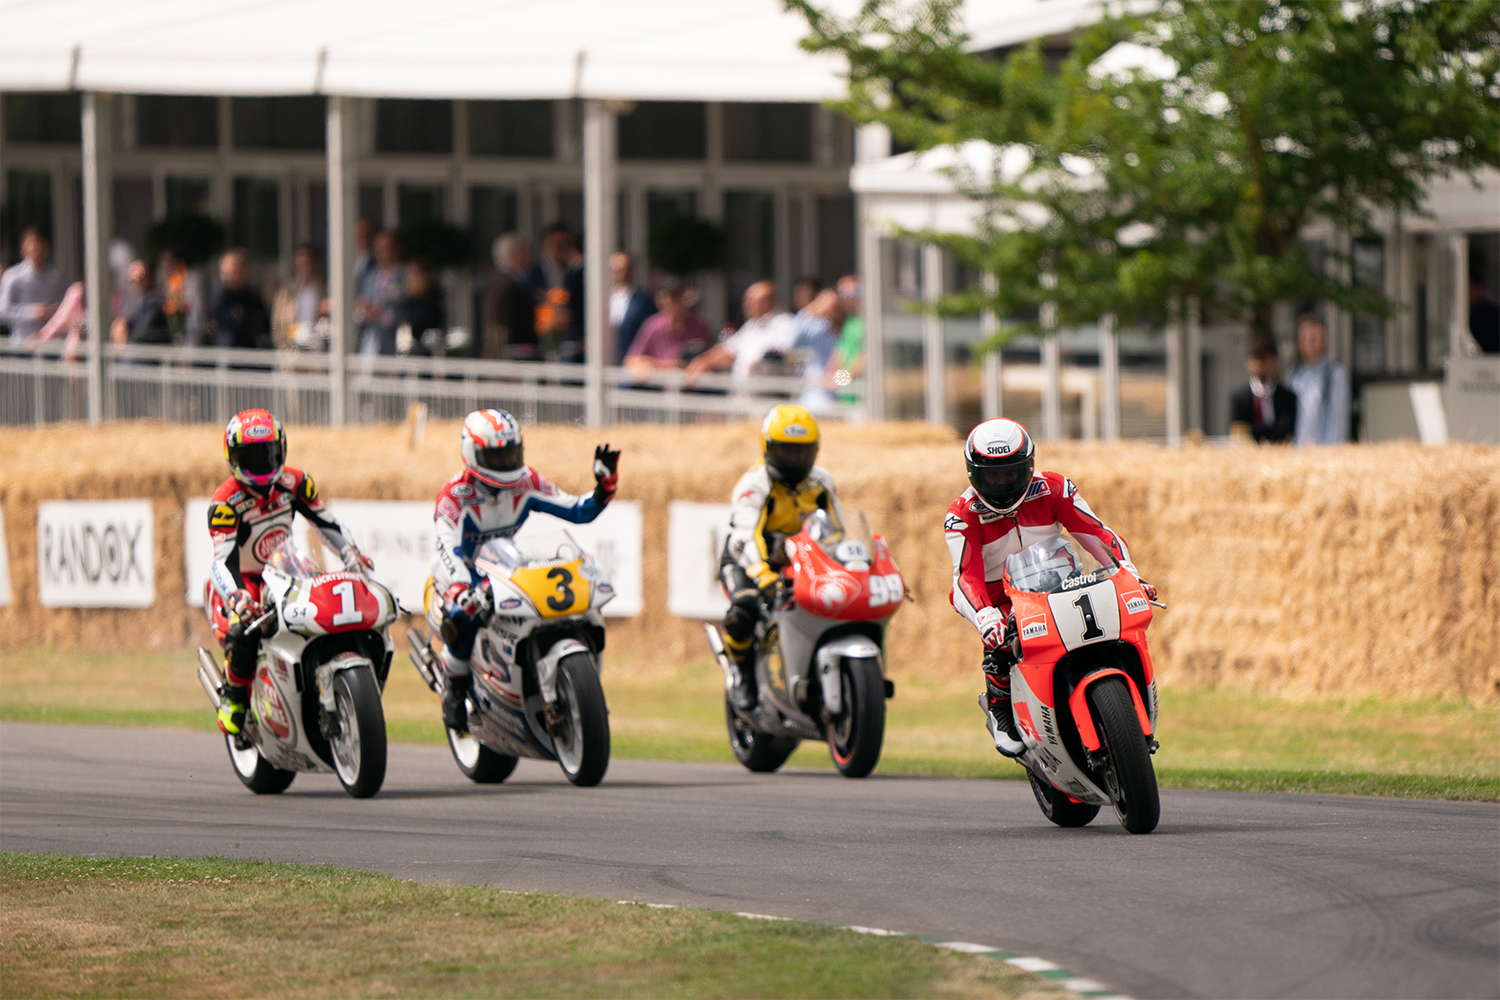 Wayne Rainey, who became paralyzed in 1993 at the height of his motorcycle racing career, will drive at the front of a pack of four at the Goodwood Festival of Speed ​​2022